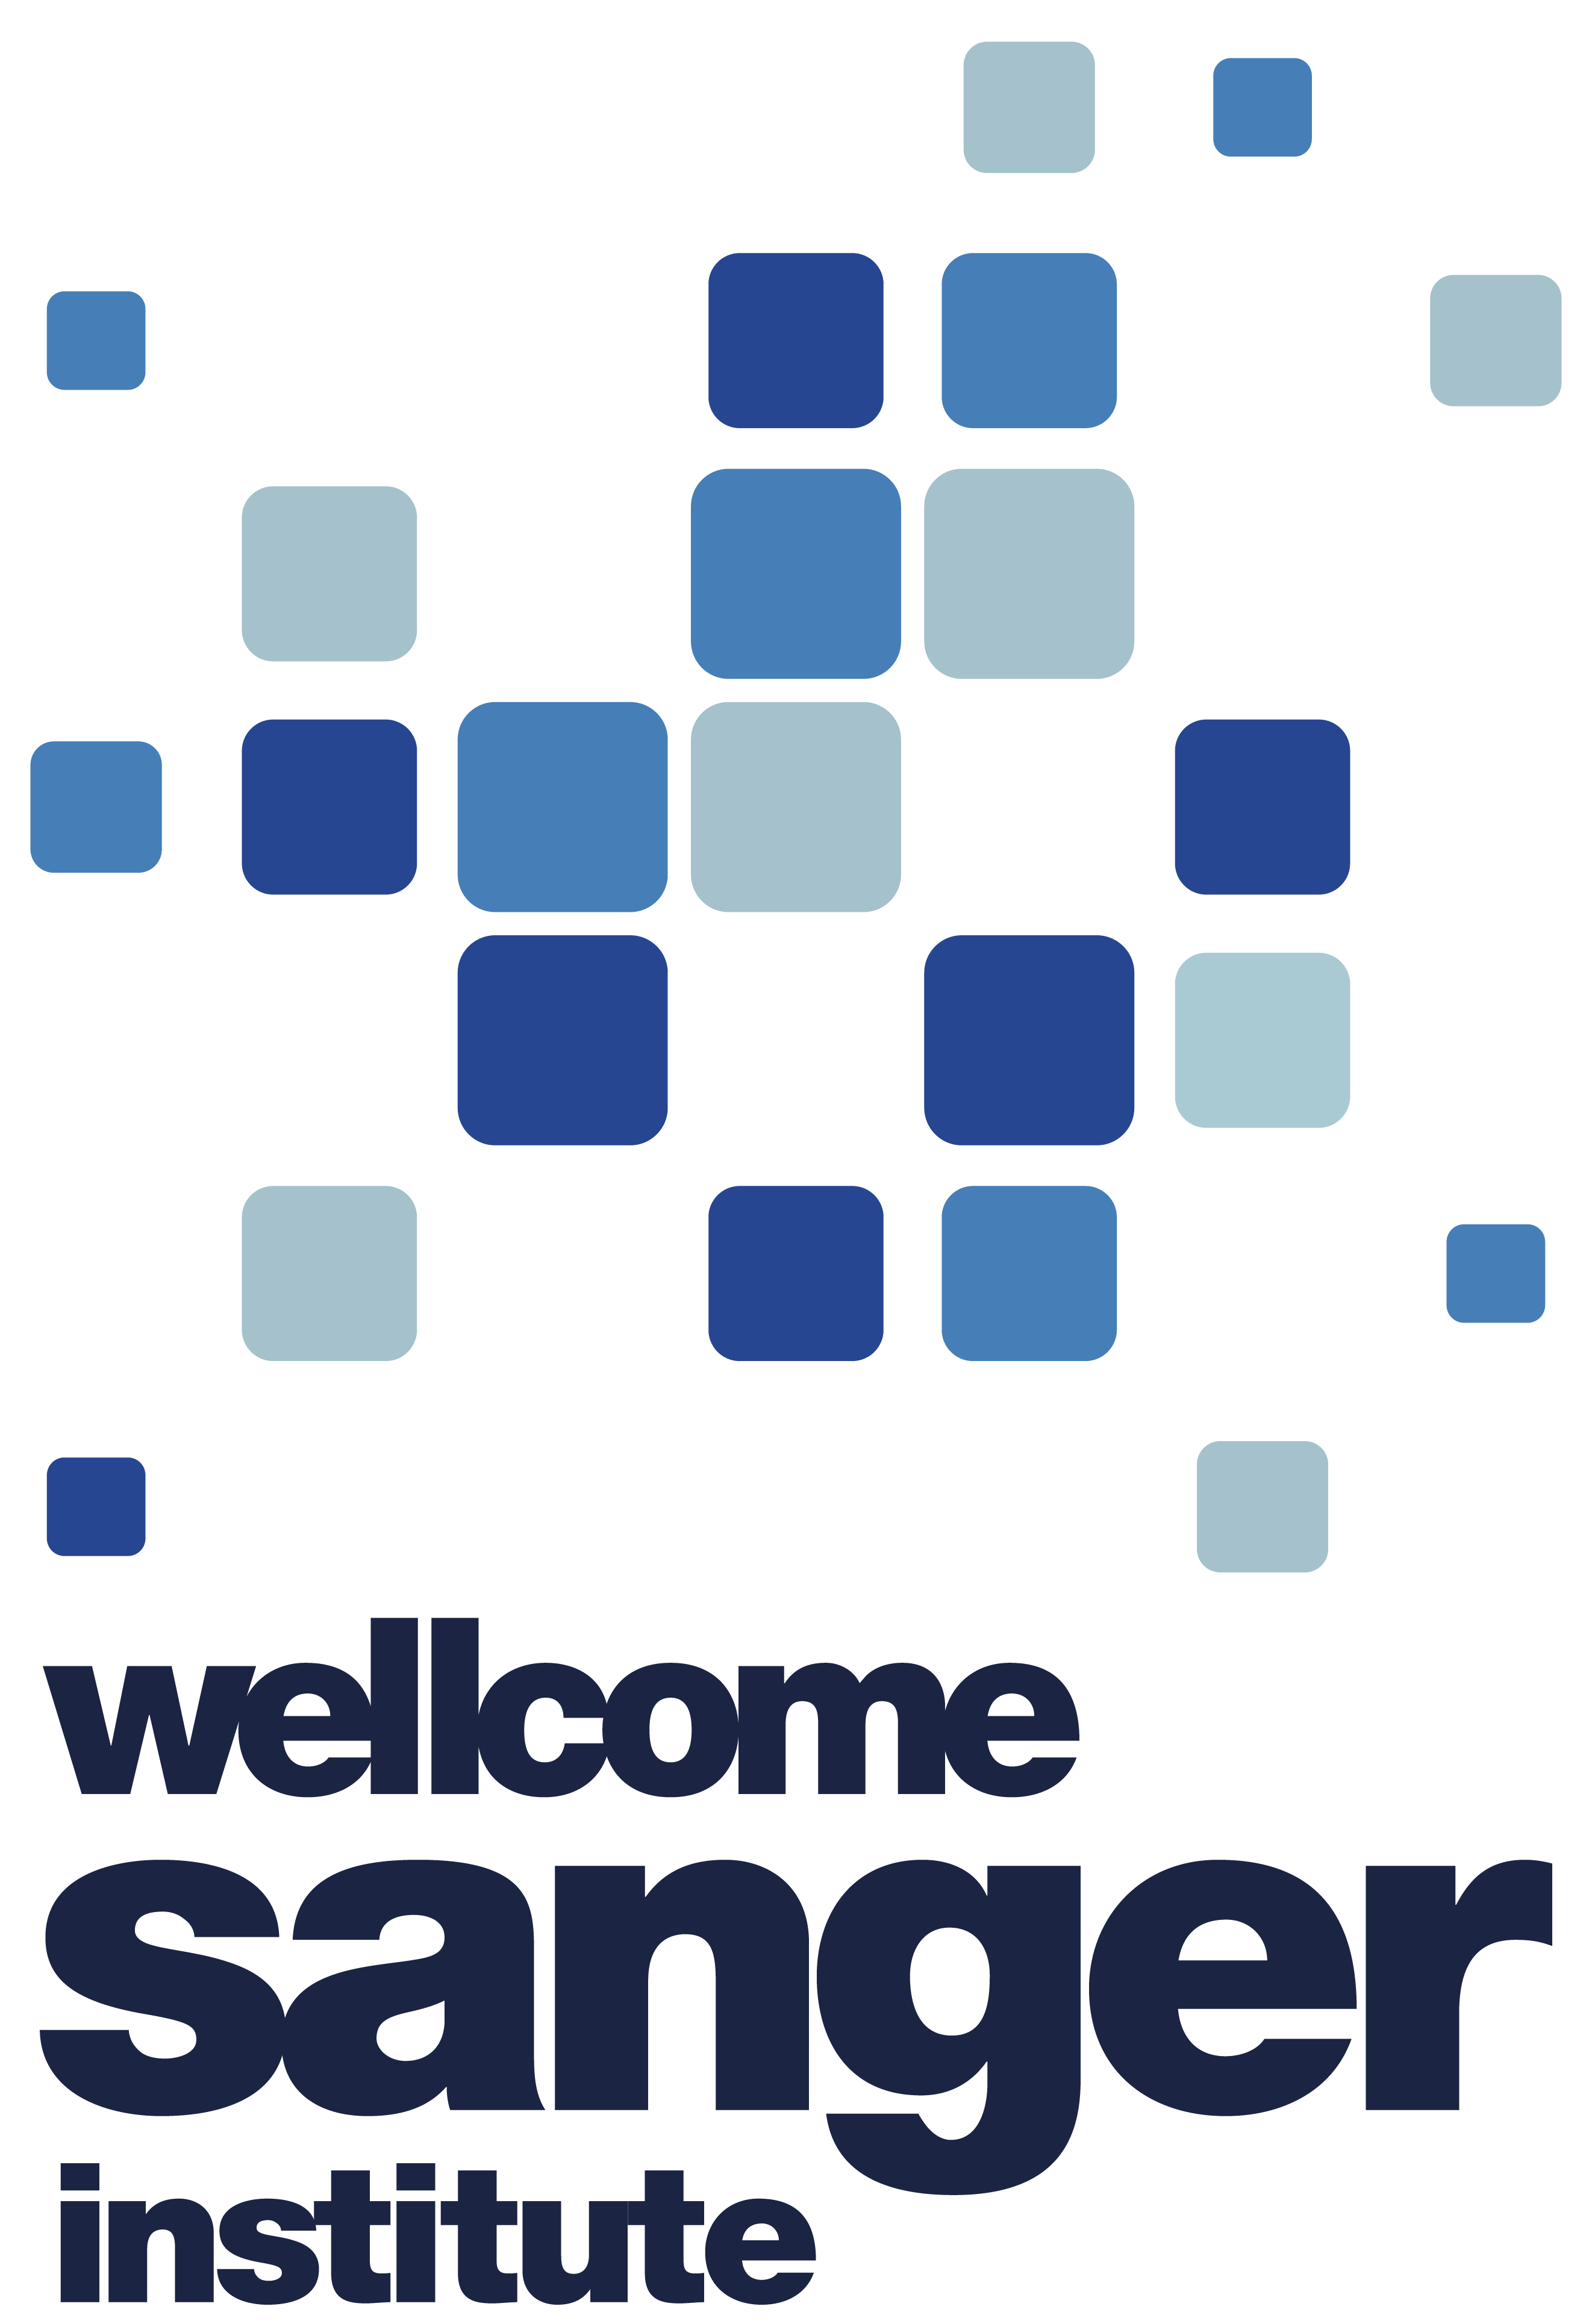 Institute Logo - Wellcome Sanger Institute Branding Guidelines and Logos. Wellcome